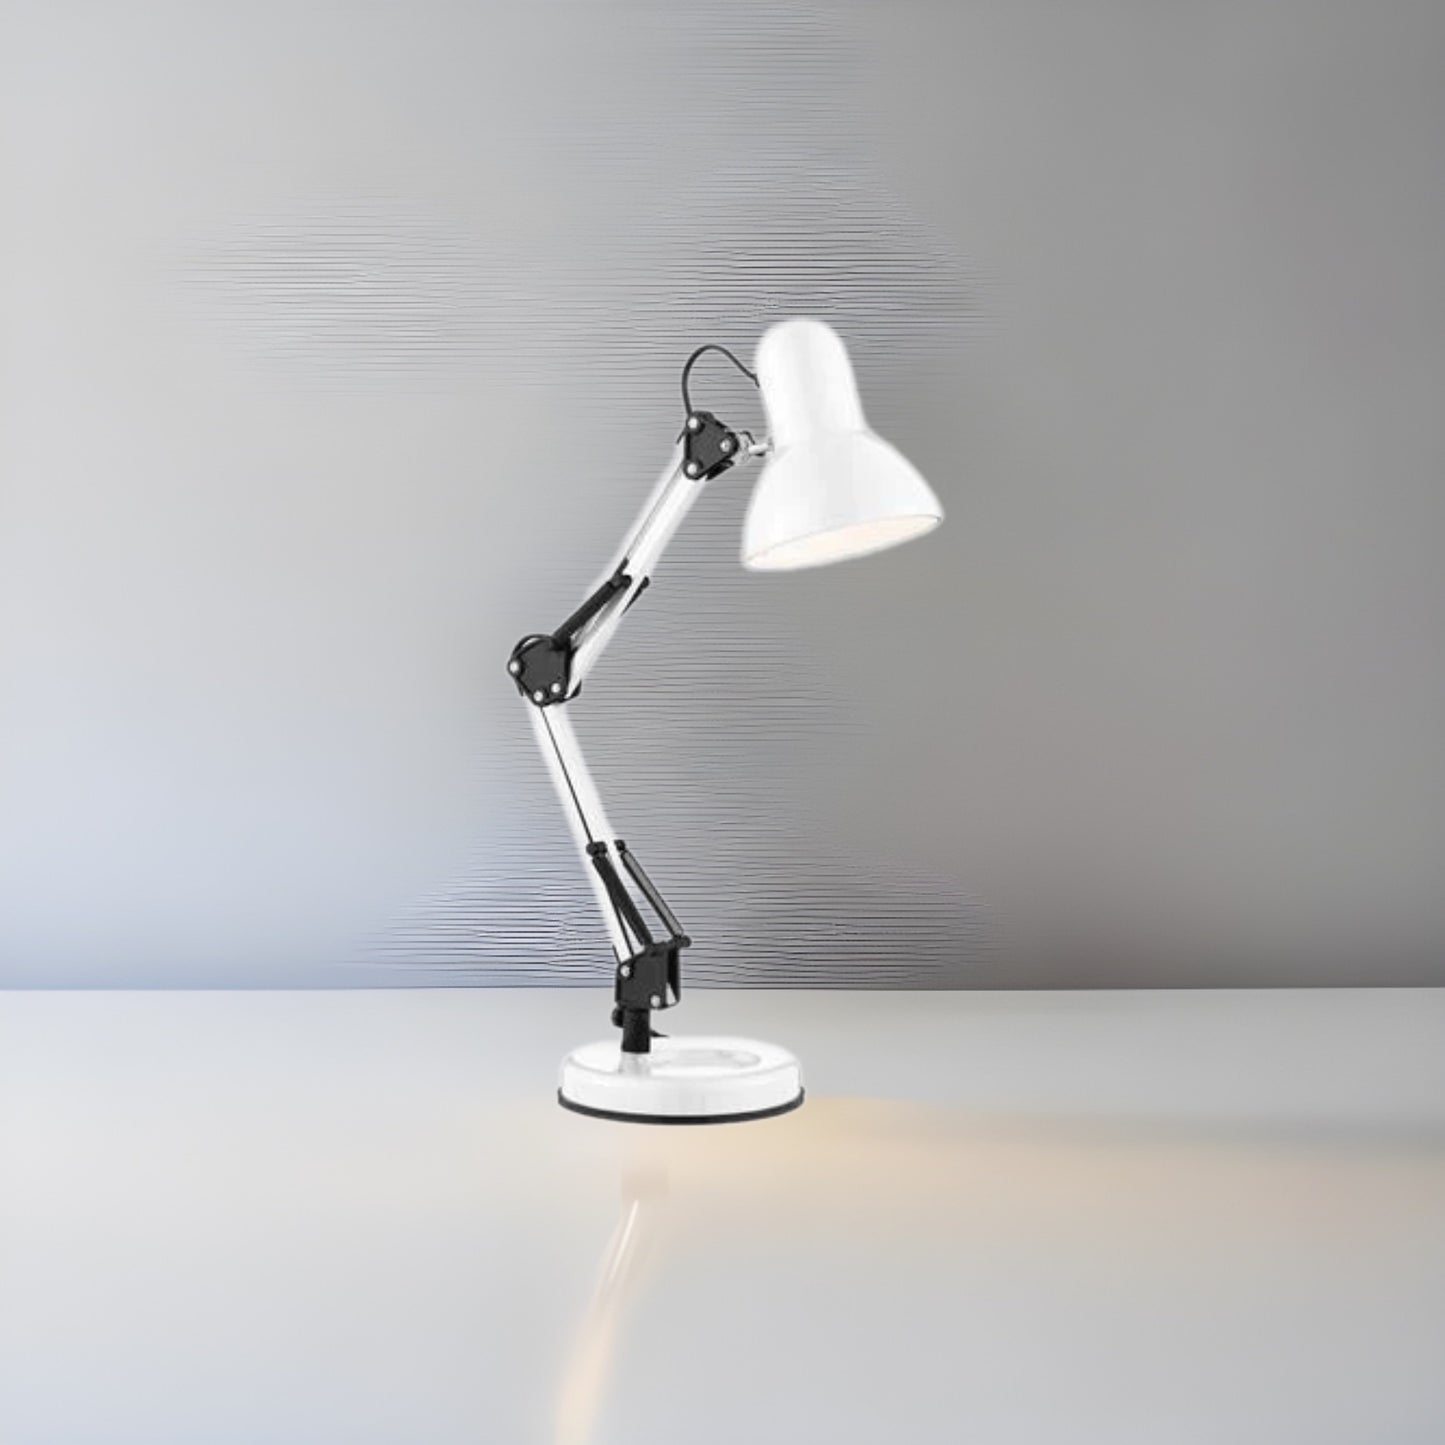 This retro, angled Desk Partners table lamp is styled on an iconic design and powder-coated in a shiny white colour. The hinged base, central column and cylindrical shade are fully adjustable, enabling you to direct the light just where it is needed. Ideal for use in a study room or a children's bedroom, contemporary desk lamps don't get more desirable.